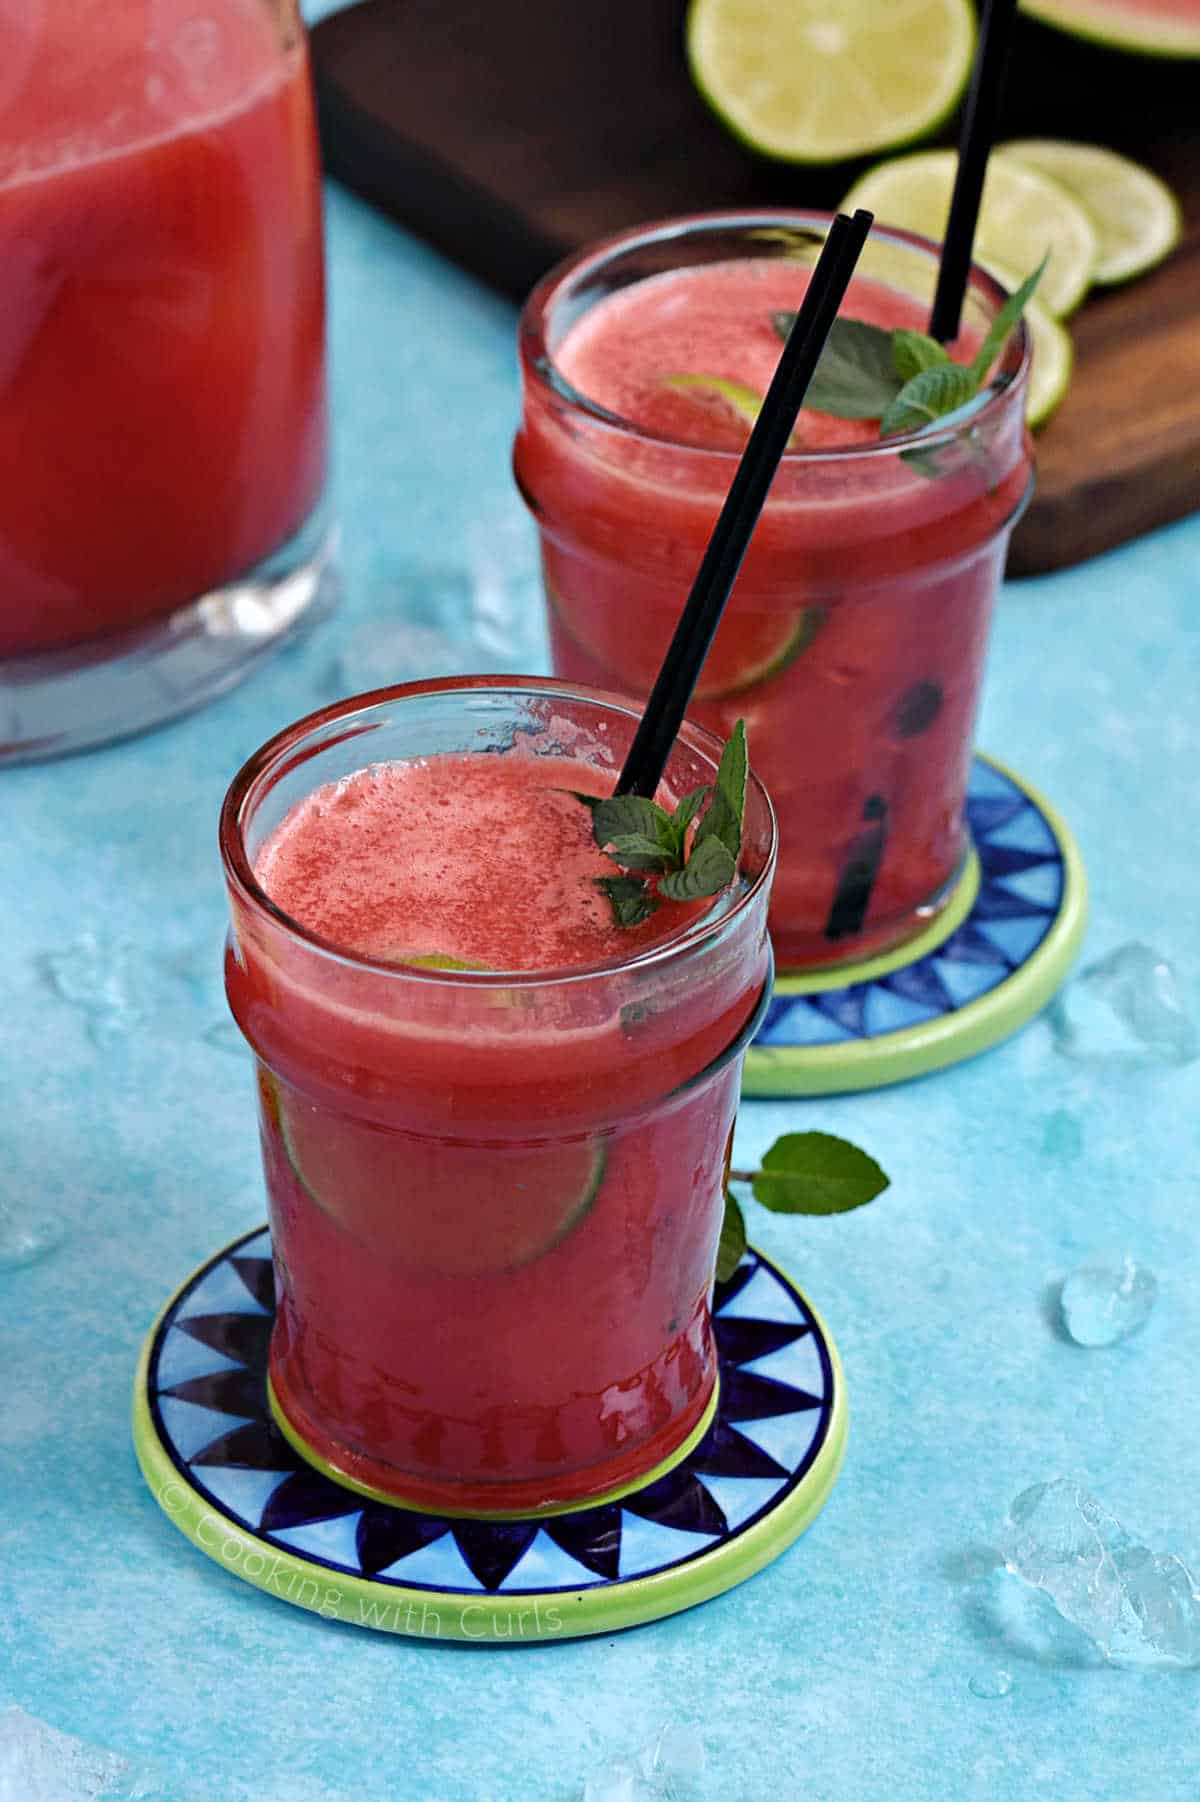 Two glasses of watermelon agua fresca with mint leaves, lime wheels, and cocktail straws, with a pitcher in the background.